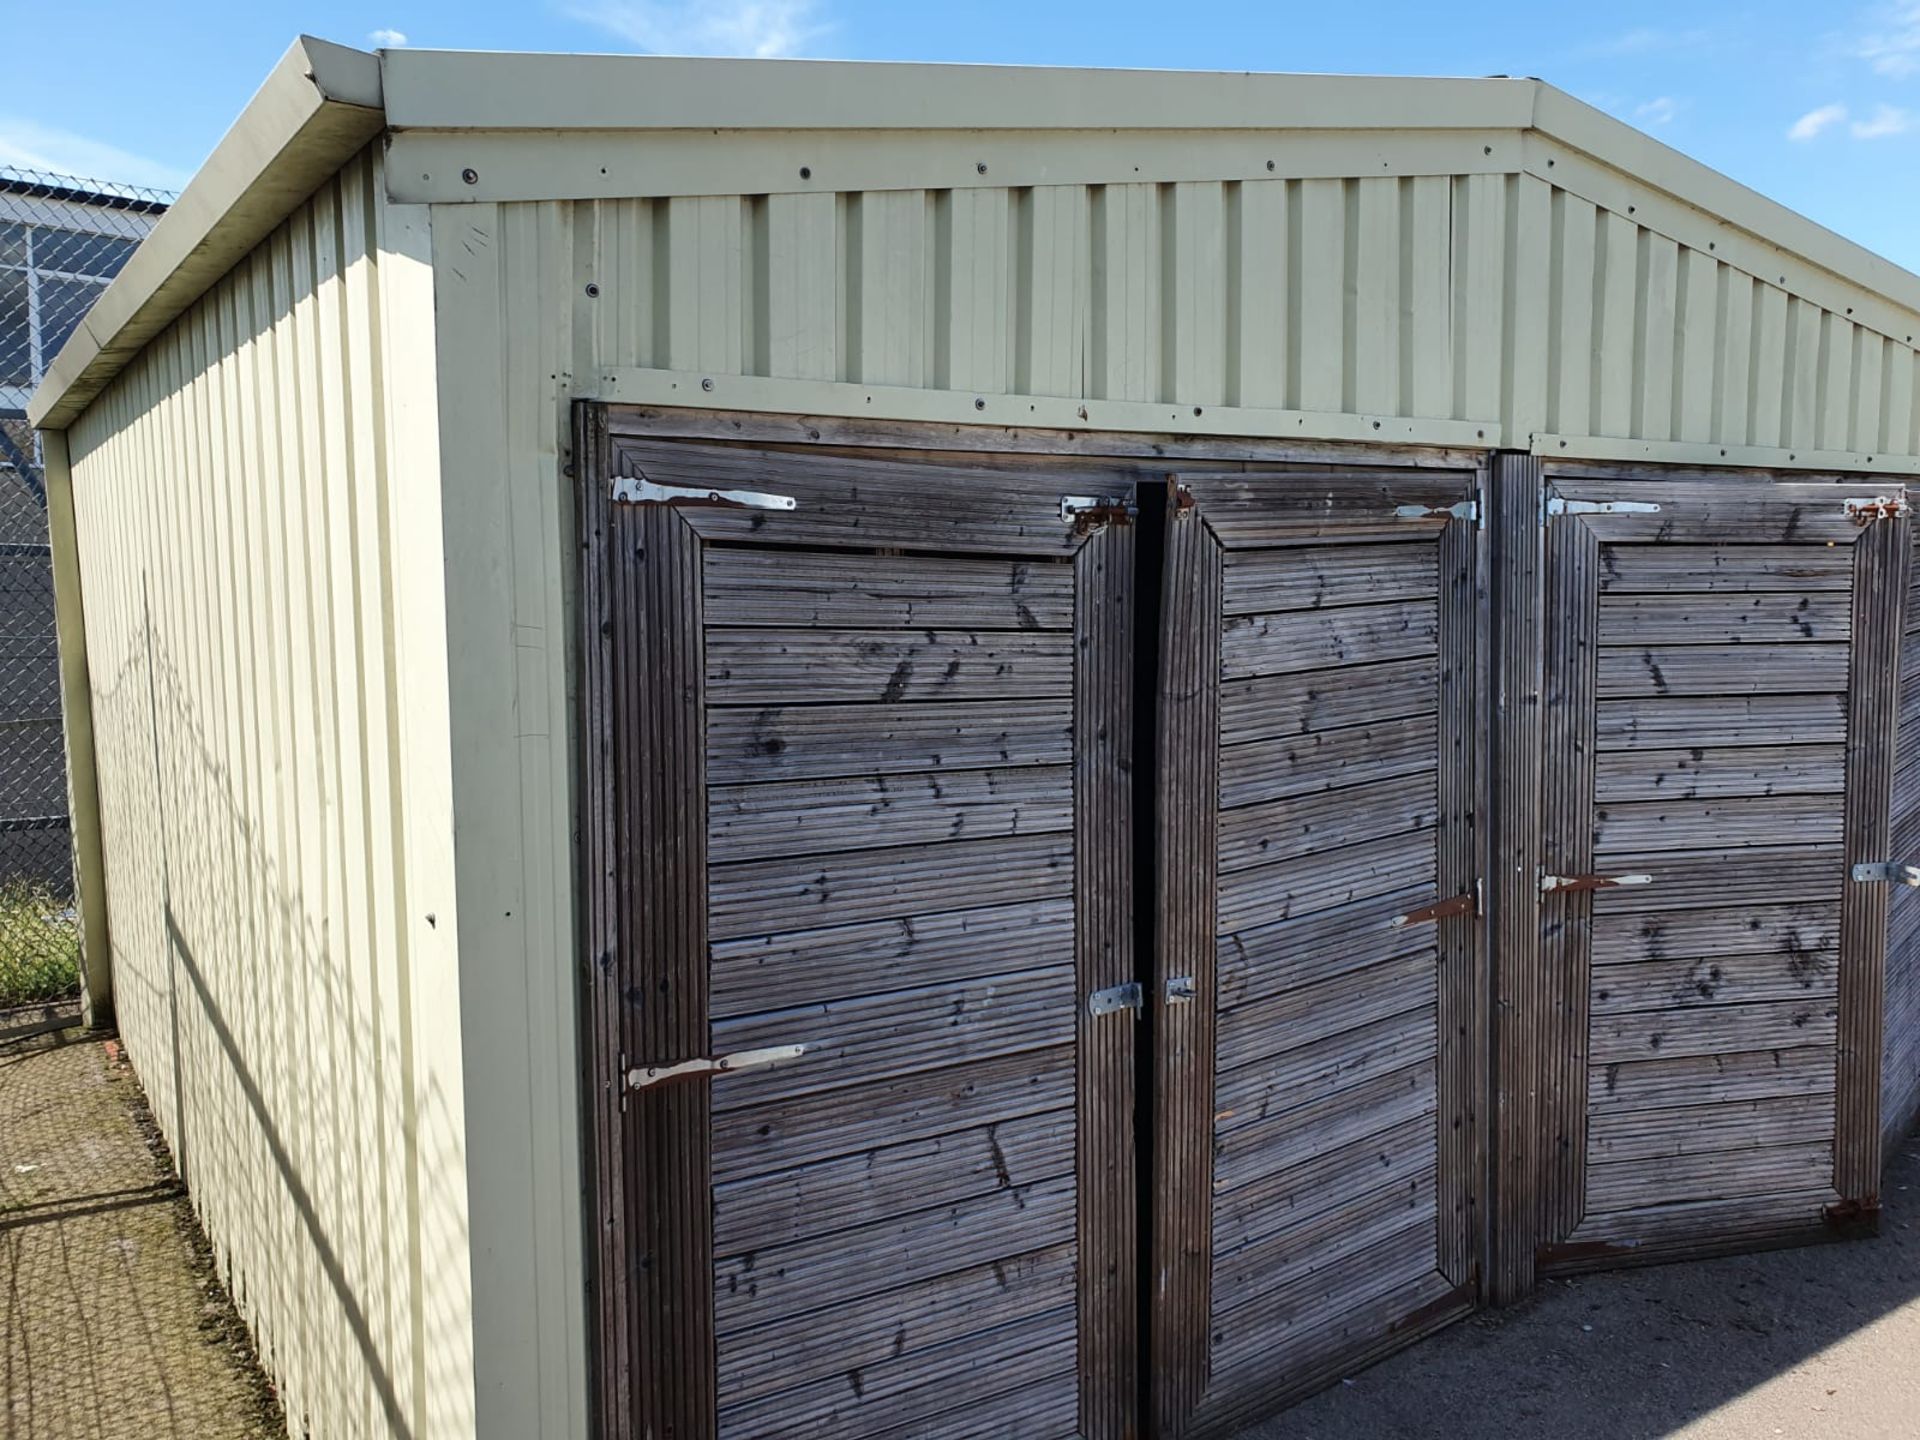 1 x Large Steel Storage Shed Container With Four Wooden Folding Doors - Approx Dimensions 5M x 5M - Image 15 of 18